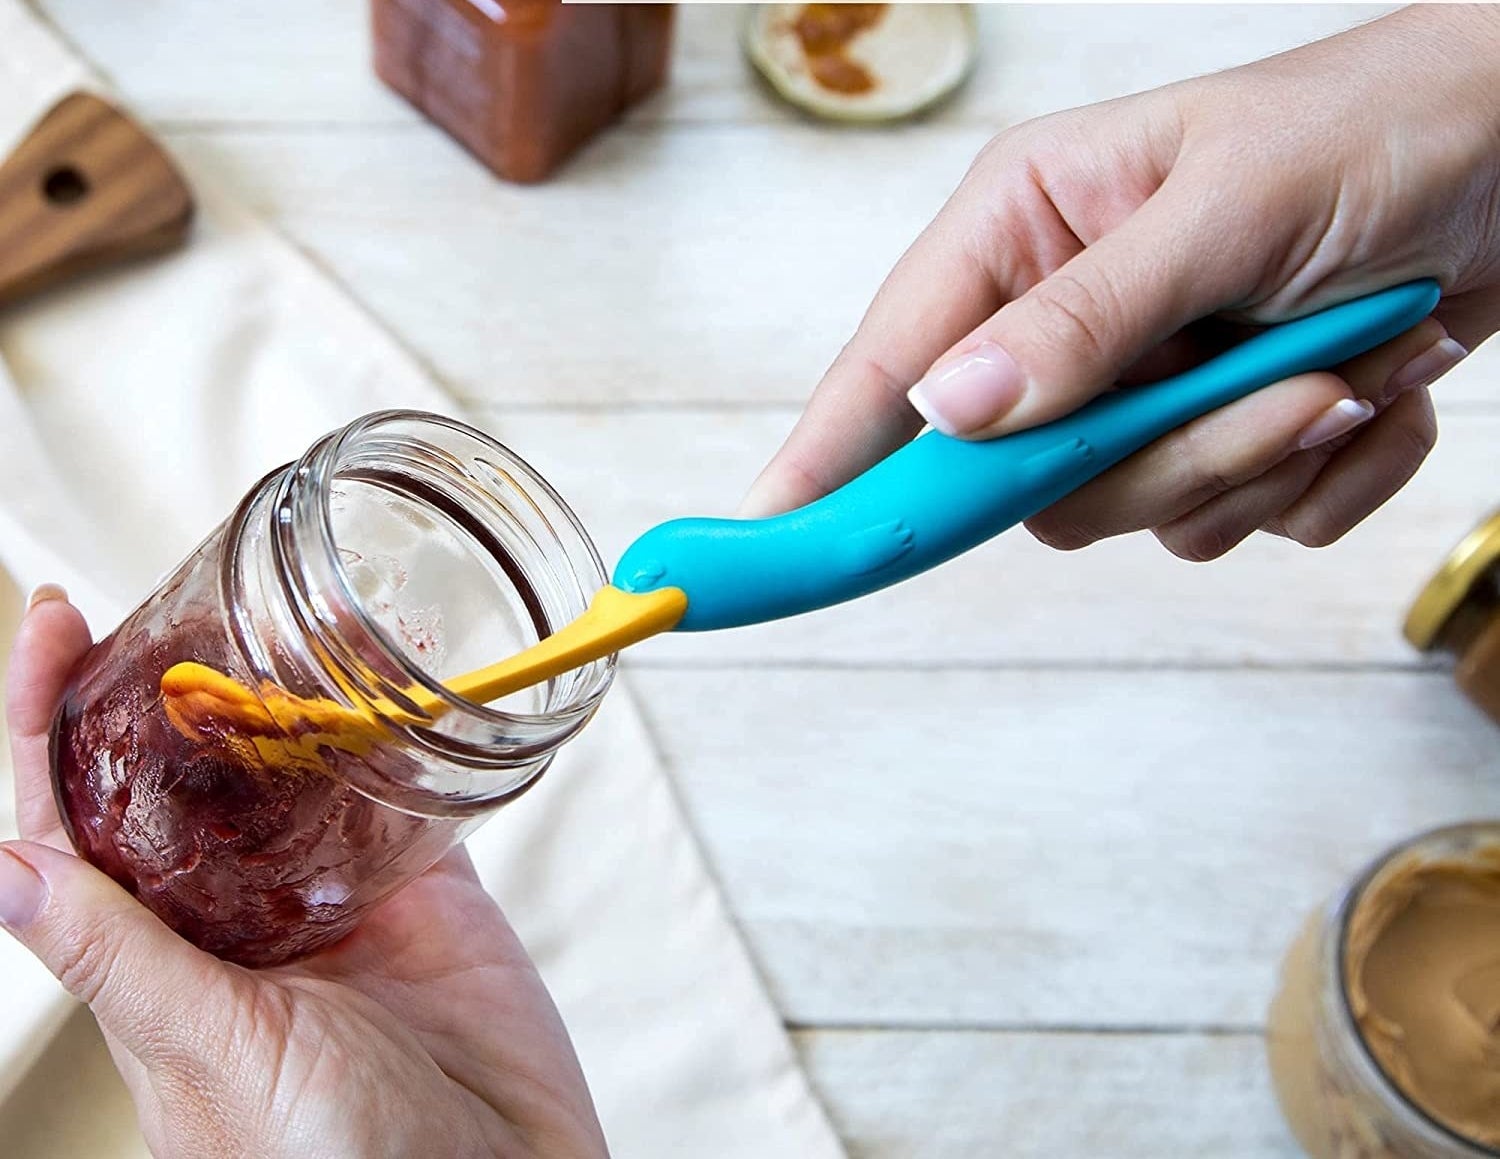 a person using the platypus shaped spatula to scoop jelly out of a jar